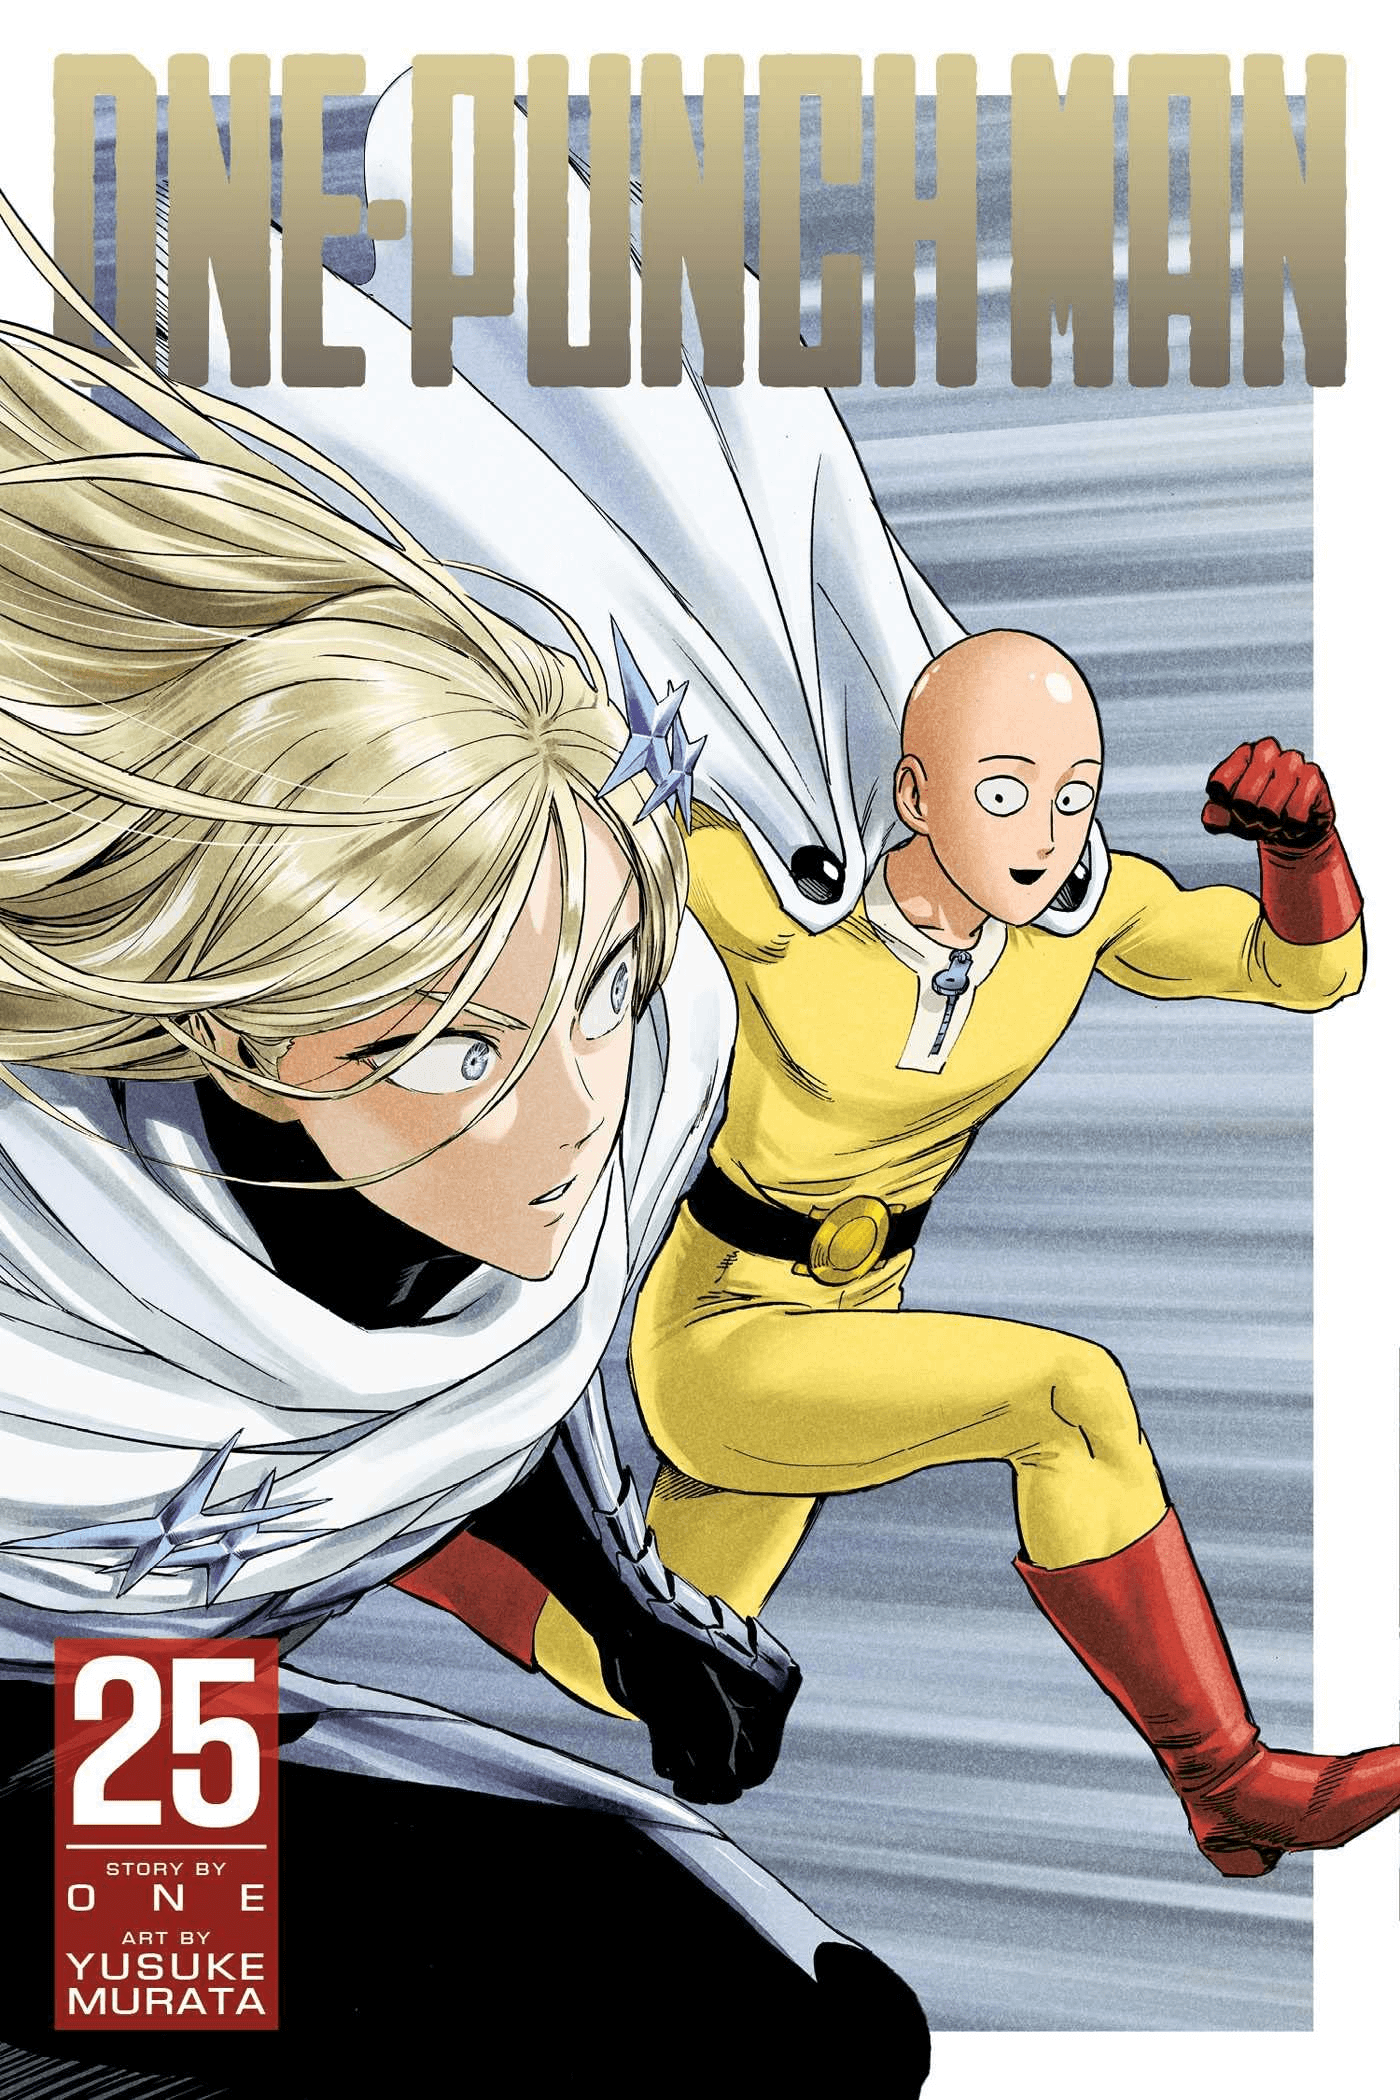 Changes from Volume 28 : r/OnePunchMan